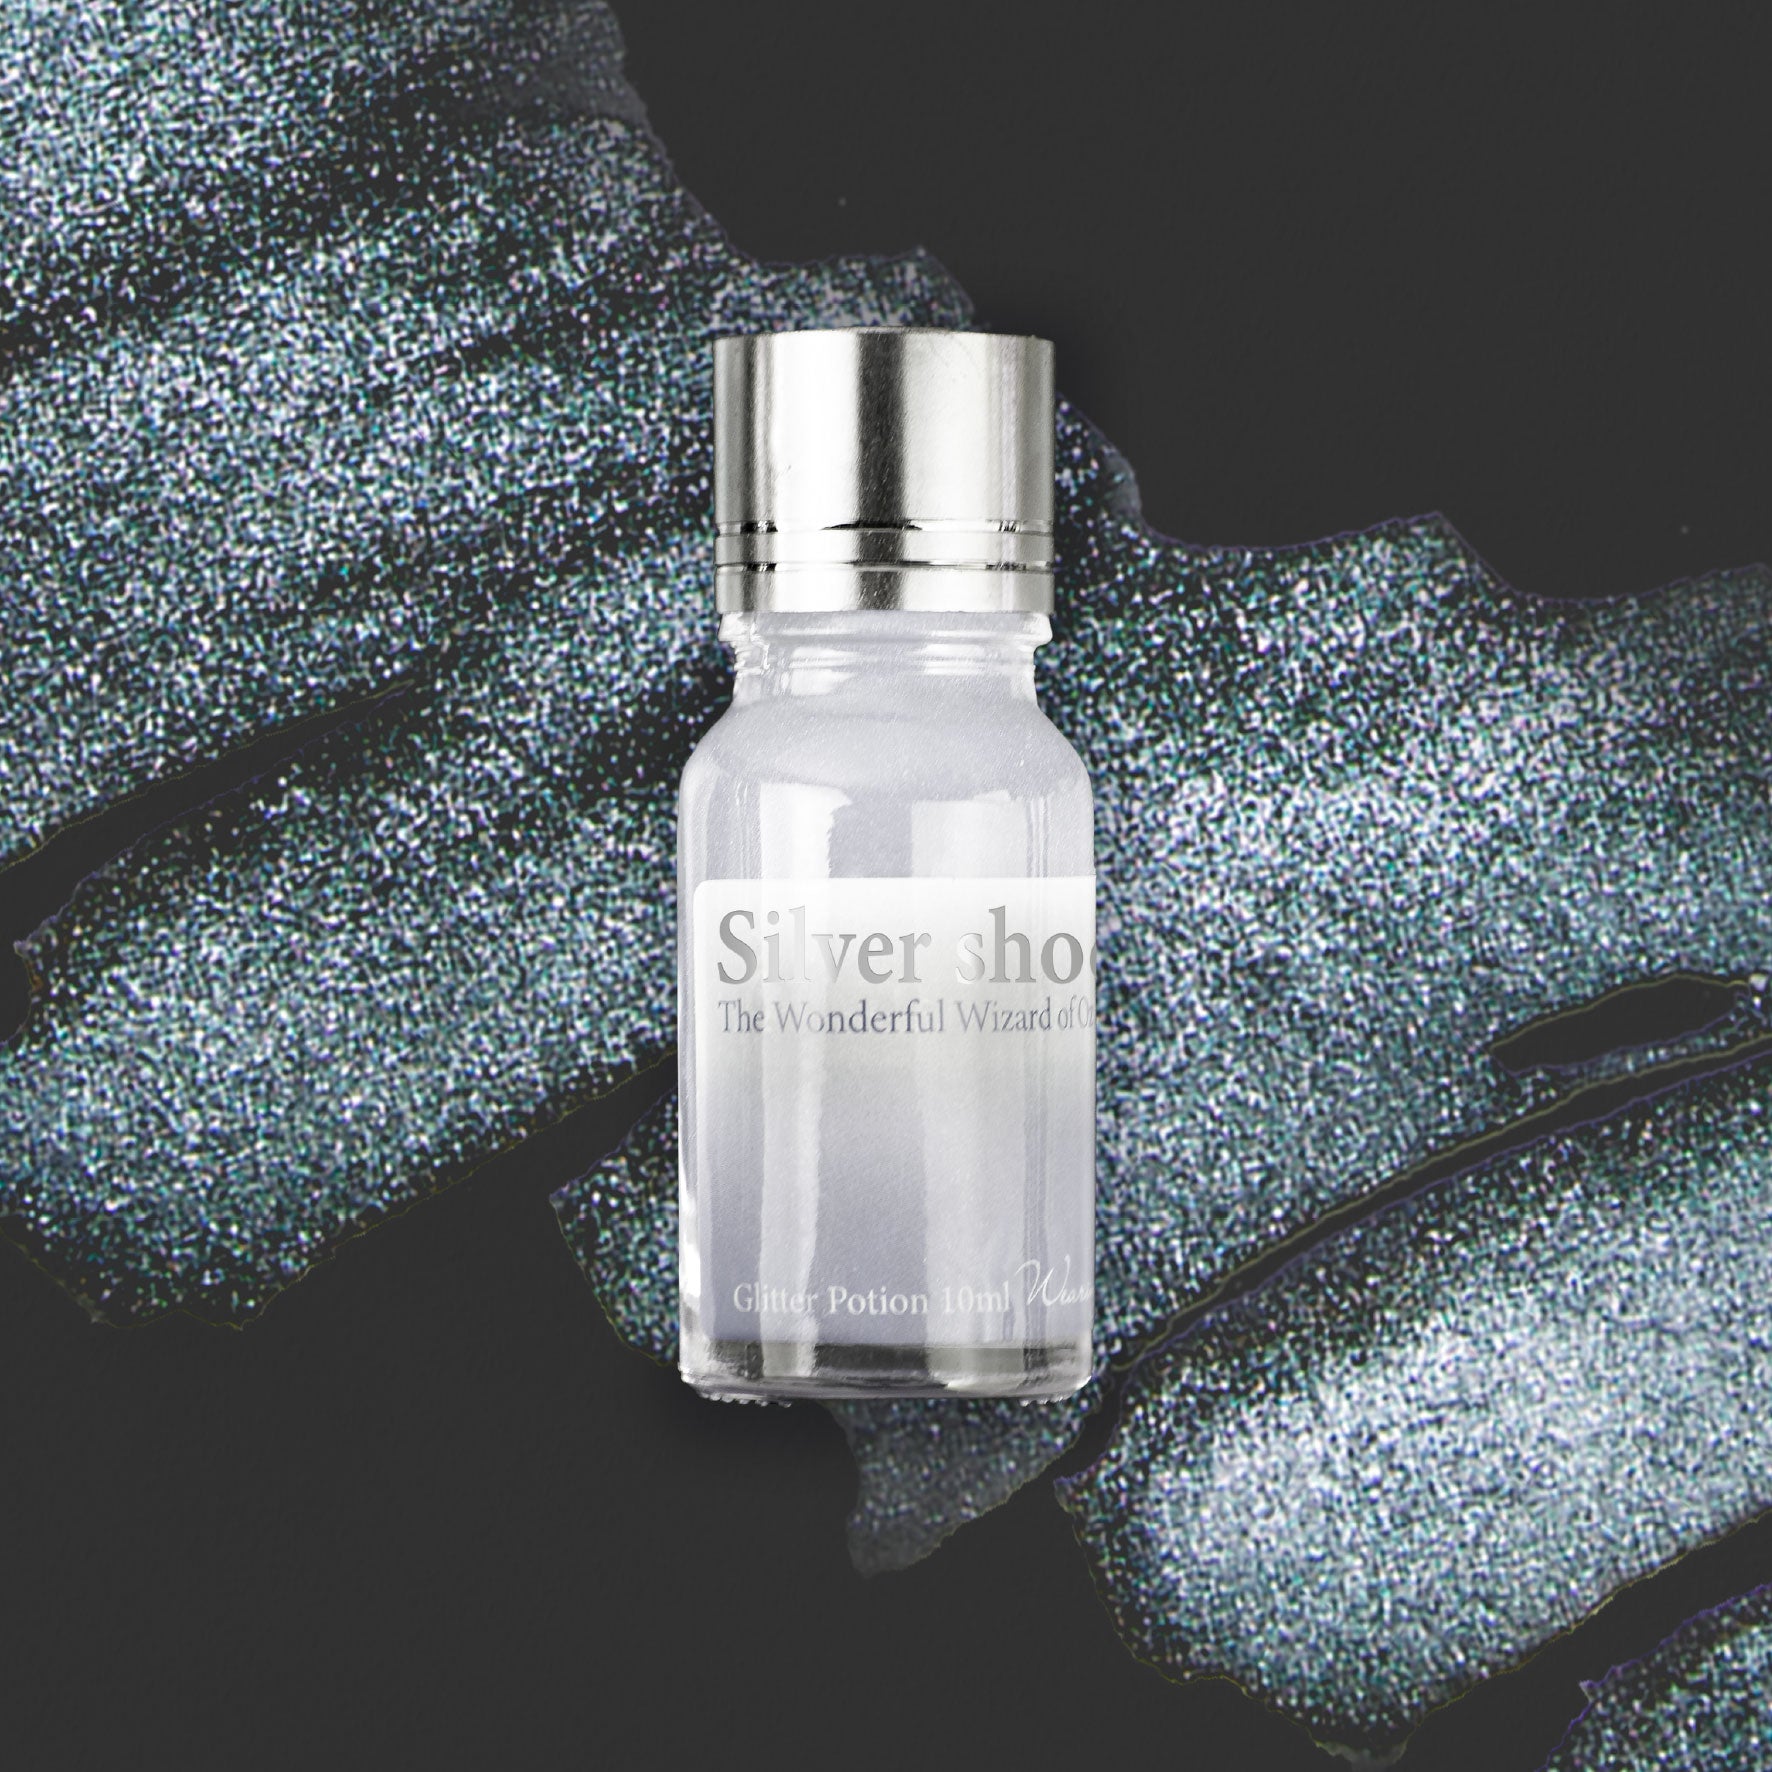 Wearingeul - Ink Additive - Glitter Potion - Silver Shoes